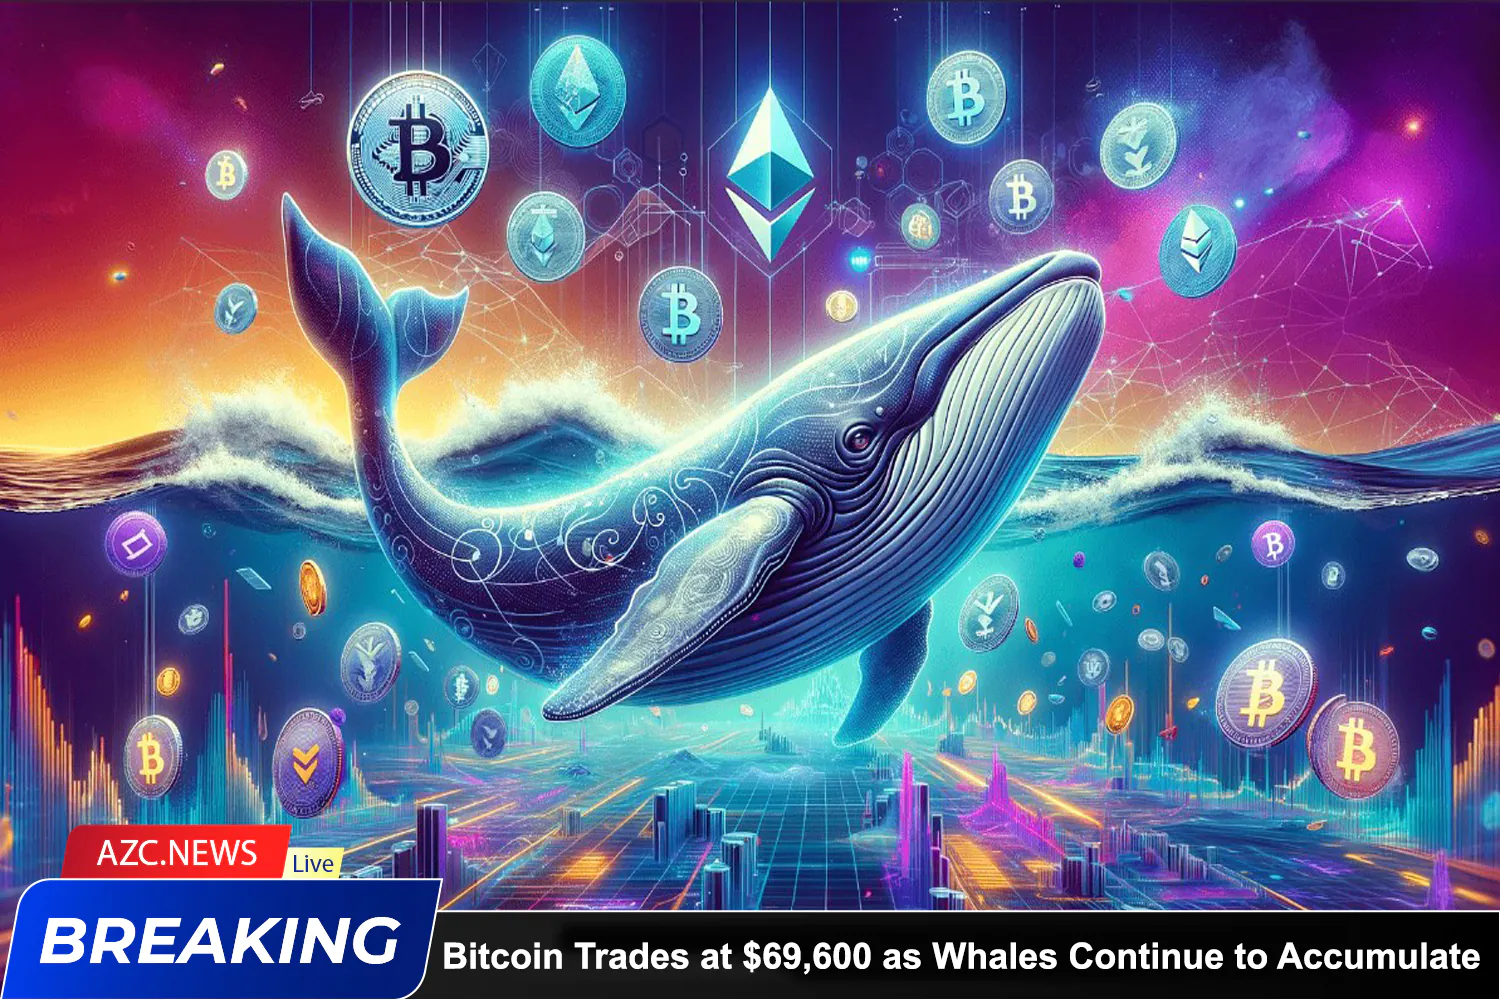 Azcnews Bitcoin Trades At $69,600 As Whales Continue To Accumulate